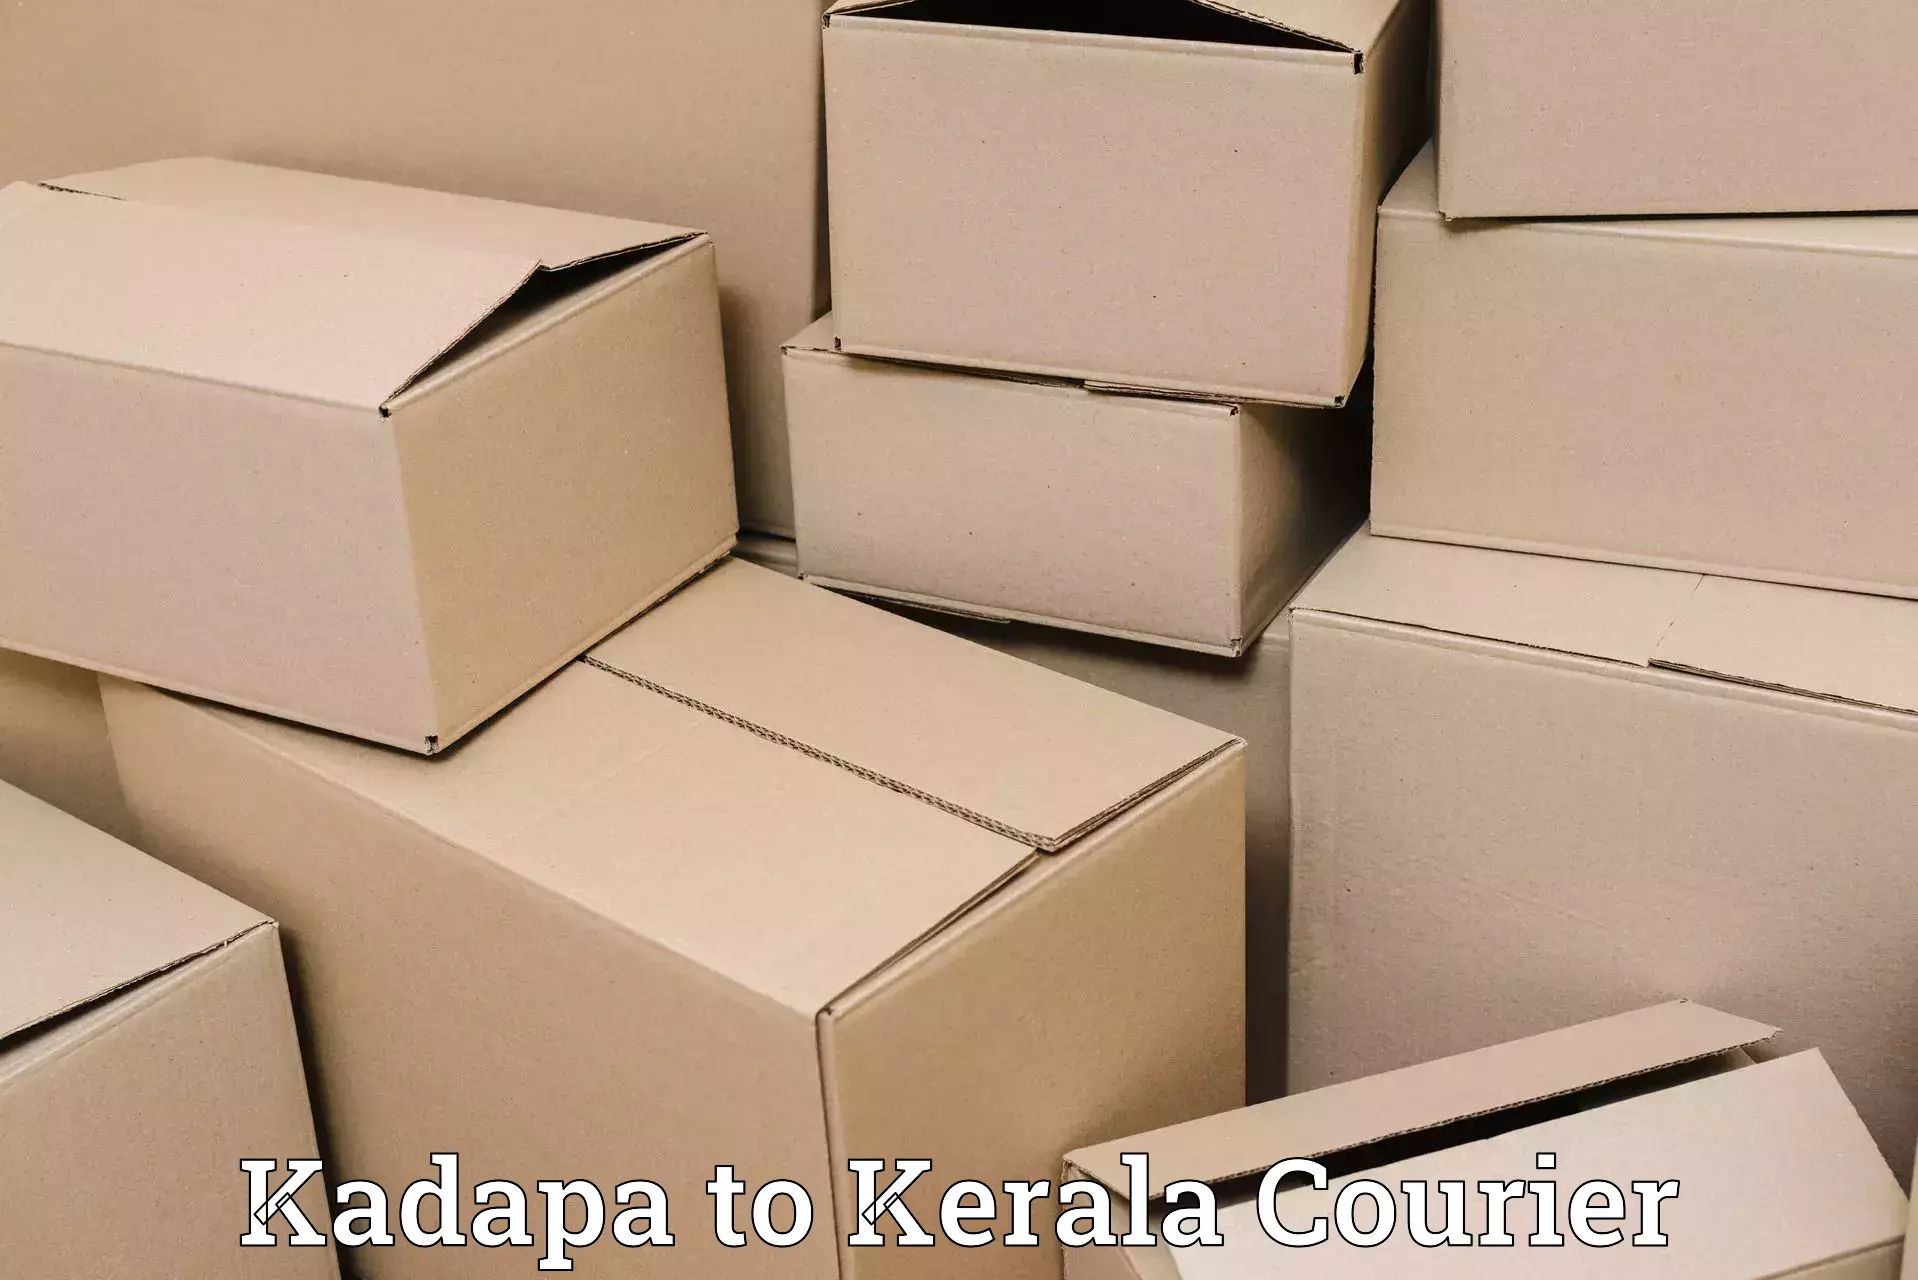 Sustainable shipping practices Kadapa to Munnar